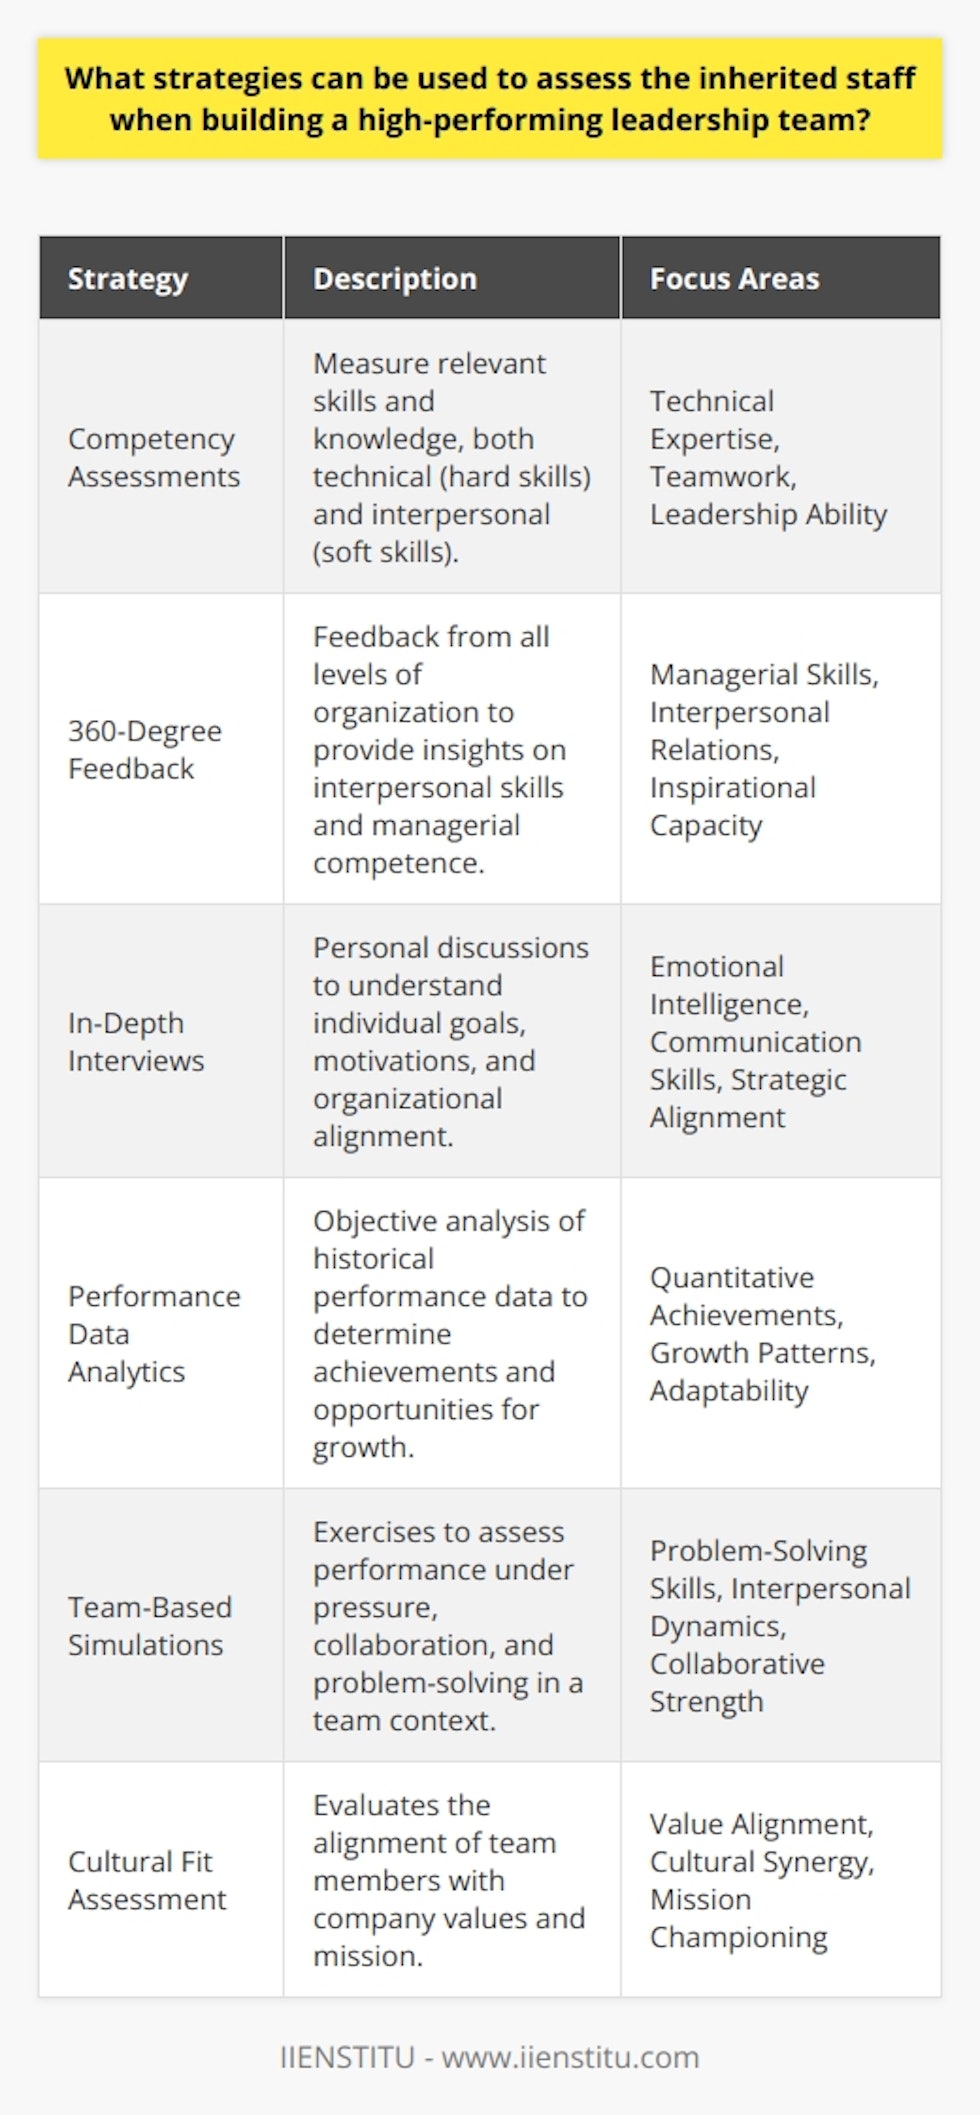 Assessing inherited staff is a critical step in crafting a high-performing leadership team. A combination of qualitative and quantitative assessment strategies can provide a comprehensive view of each team member's capabilities, compatibility with team goals, and potential for growth within the leadership structure.One strategic approach includes tailored competency assessments, which measure an individual's skills and knowledge relevant to their role. These assessments should be designed to evaluate both hard skills, such as technical expertise, and soft skills, such as teamwork and leadership ability.360-degree feedback is a powerful tool for assessing inherited staff from multiple viewpoints. This process involves collecting feedback from not only supervisors but also peers and subordinates. This well-rounded approach can highlight interpersonal skills, managerial competencies, and the capacity to inspire and guide teams effectively. To ensure the process is constructive, consider using anonymous feedback and providing training on how to give and receive feedback productively.In-depth interviews with each team member can reveal their personal goals, motivations, and alignment with the organization’s vision. This type of qualitative assessment allows for open dialogue where members can express their aspirations, concerns, and expectations. Here, emotional intelligence, communication skills, and strategic thinking become apparent, essential traits in leadership roles.Performance data analytics offers an objective strategy to assess staff potential. Reviewing historical performance data — such as project outcomes, sales figures, or other relevant metrics — provides a fact-based understanding of each team member's achievements and areas of opportunity. Again, it is crucial to look for patterns of growth and adaptability, as past performance can be an indicator of future potential given the right development opportunities.Team-based assessments can be conducted through simulations and scenario planning exercises. These activities test how well team members perform under pressure, their problem-solving skills, and their ability to collaborate towards common goals. Observing interpersonal dynamics during these exercises might reveal latent leadership qualities or areas in need of coaching.Cultural fit assessments are also important. The leadership team's effectiveness is partially determined by the synergy among its members; this synergy is greatly influenced by shared values and culture. Surveys or discussions about the company's values and mission can uncover which individuals are most naturally aligned with the company's ethos and therefore most likely to champion and embody it within the team.In employing these strategies, it's important to create a supportive atmosphere where staff feel comfortable and understand that assessments are not punitive but designed to help them grow and contribute effectively to team success. Moreover, transparent communication about the results and follow-up actions, such as personalized development plans or team-building initiatives, is critical to maintain trust and morale.Establishing a culture of continuous improvement, fostering open communication, and recognizing individual contributions as well as areas for professional development are principles that, if incorporated into the assessment process, will not only identify the strengths and gaps within the inherited staff but will also position the leadership team for long-term success.